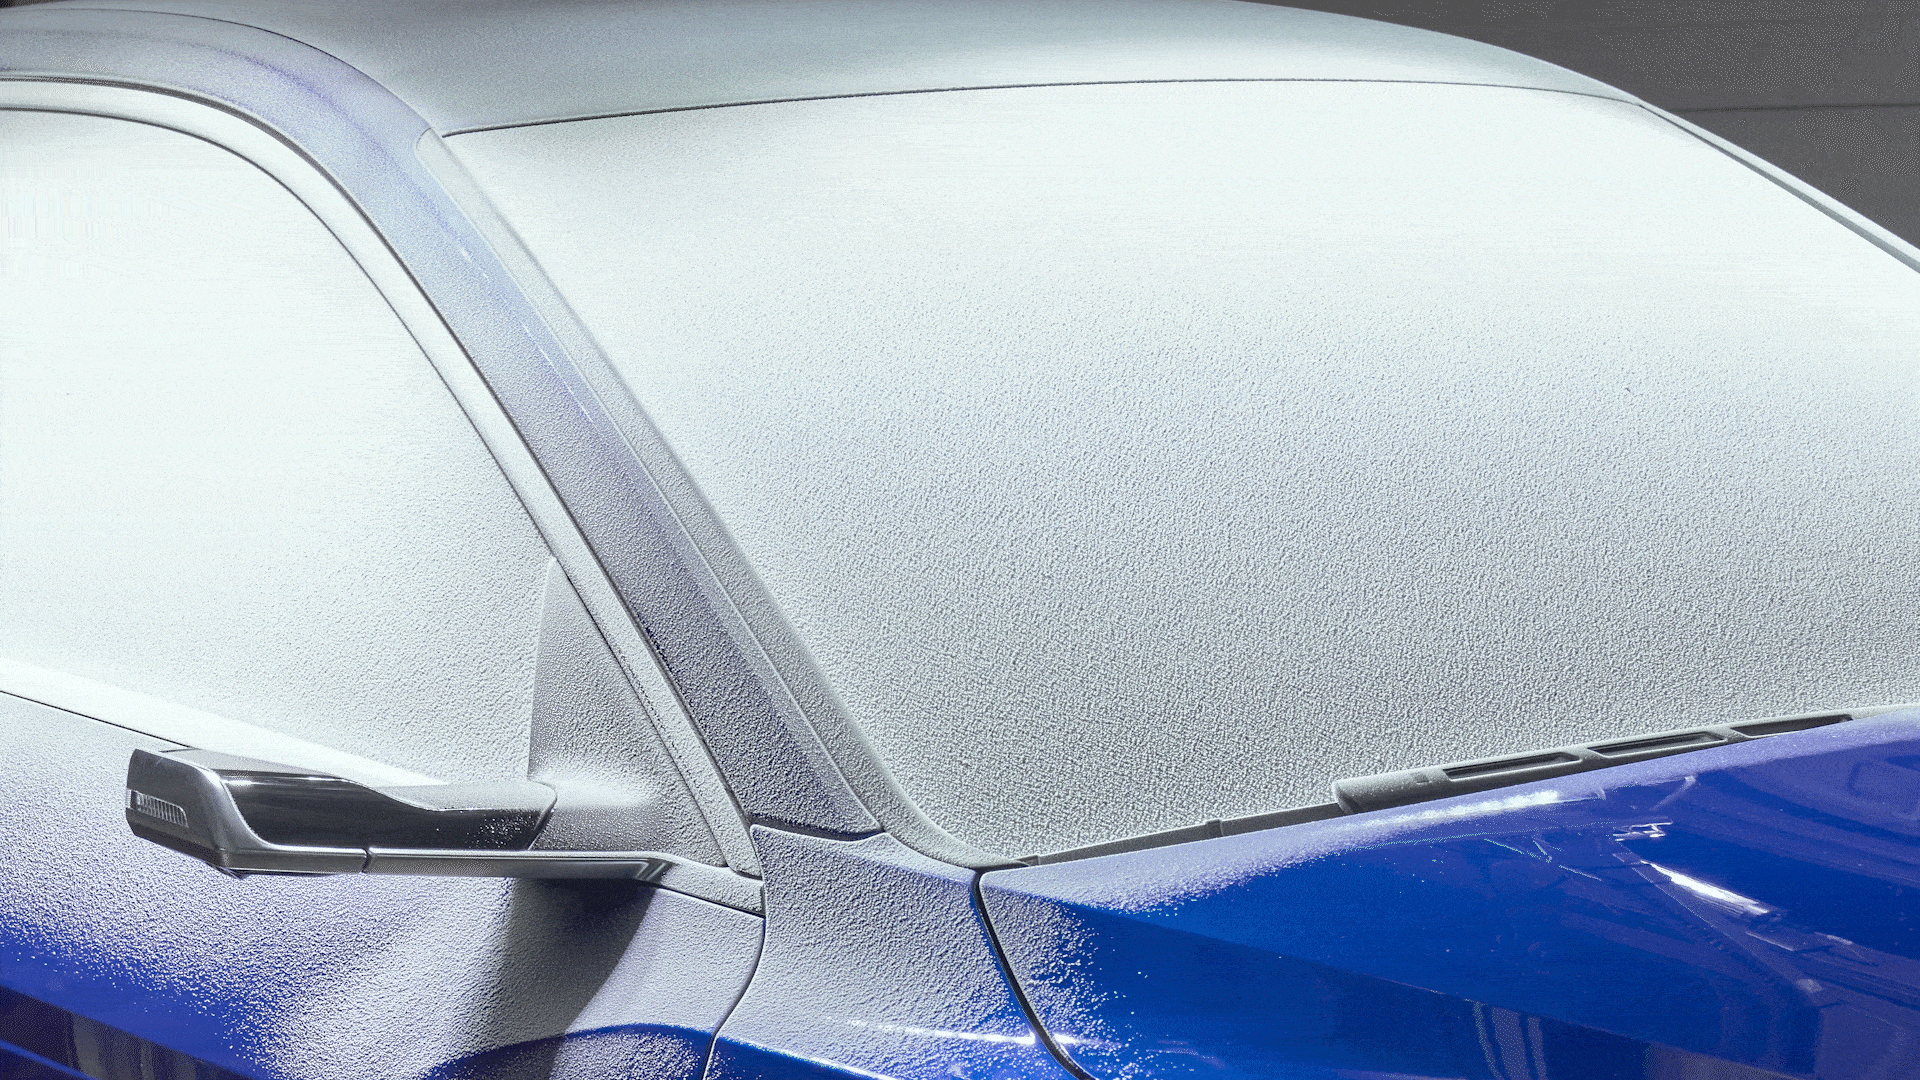 The iced-up front windscreen of the Audi SQ8 Sportback clears.